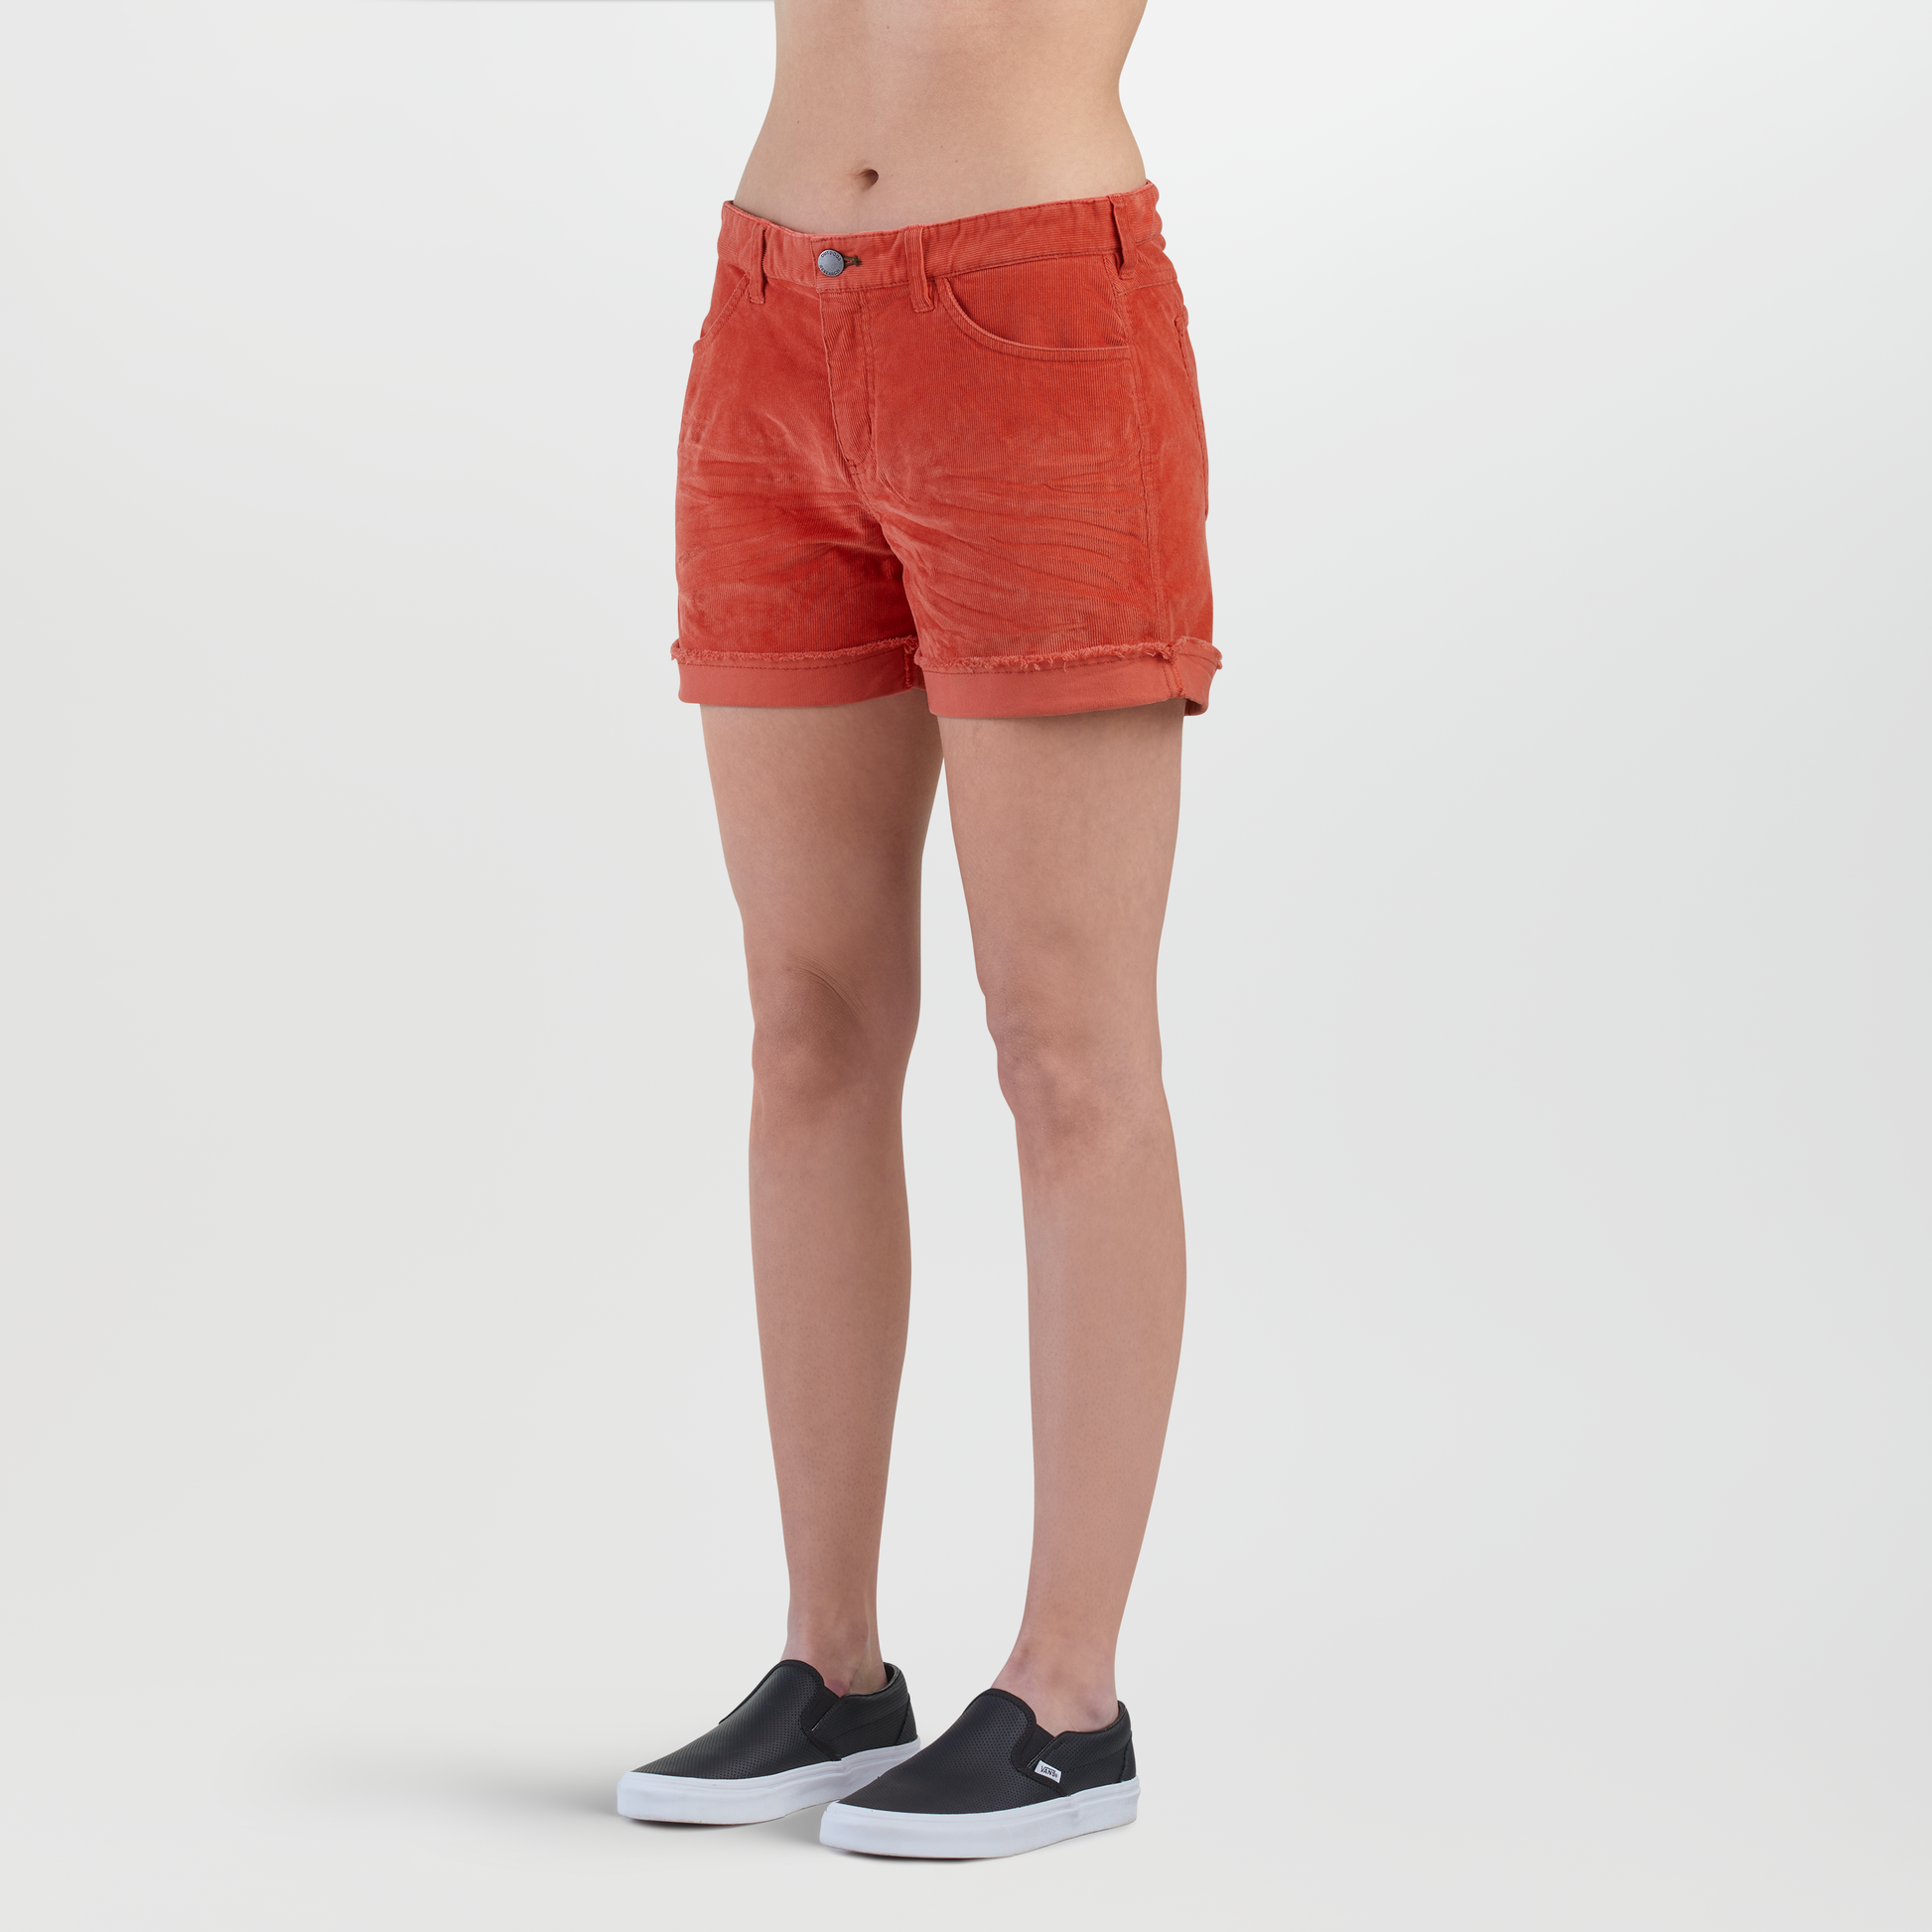 Women's Shorts & Skorts – Outdoor Research